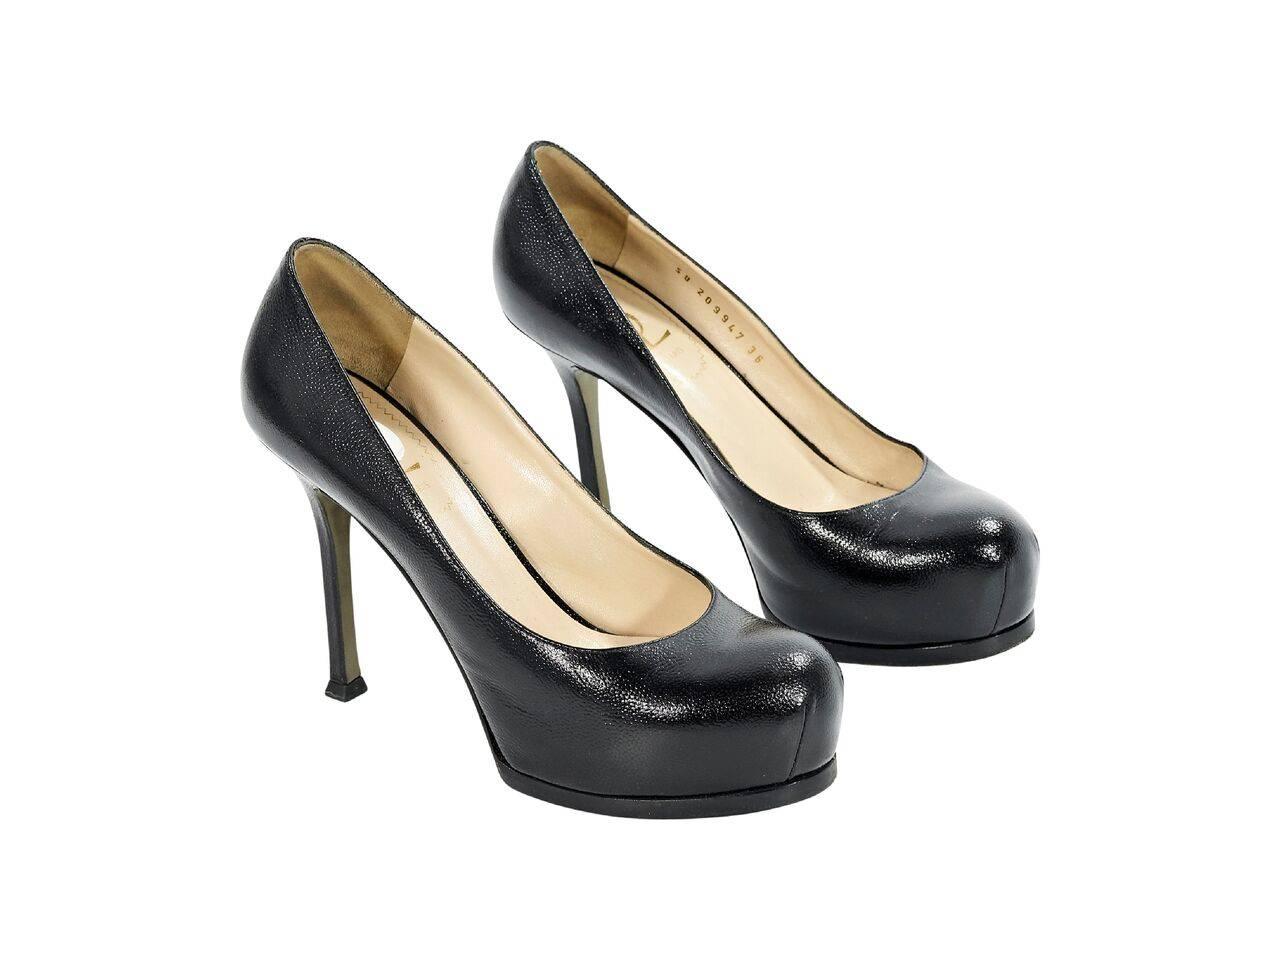 Product details:  Black pebbled leather platform pumps by Yves Saint Laurent.  Round toe.  Covered platform.  Slip-on style. 
Condition: Pre-owned. Very good.
Est. Retail $ 698.00